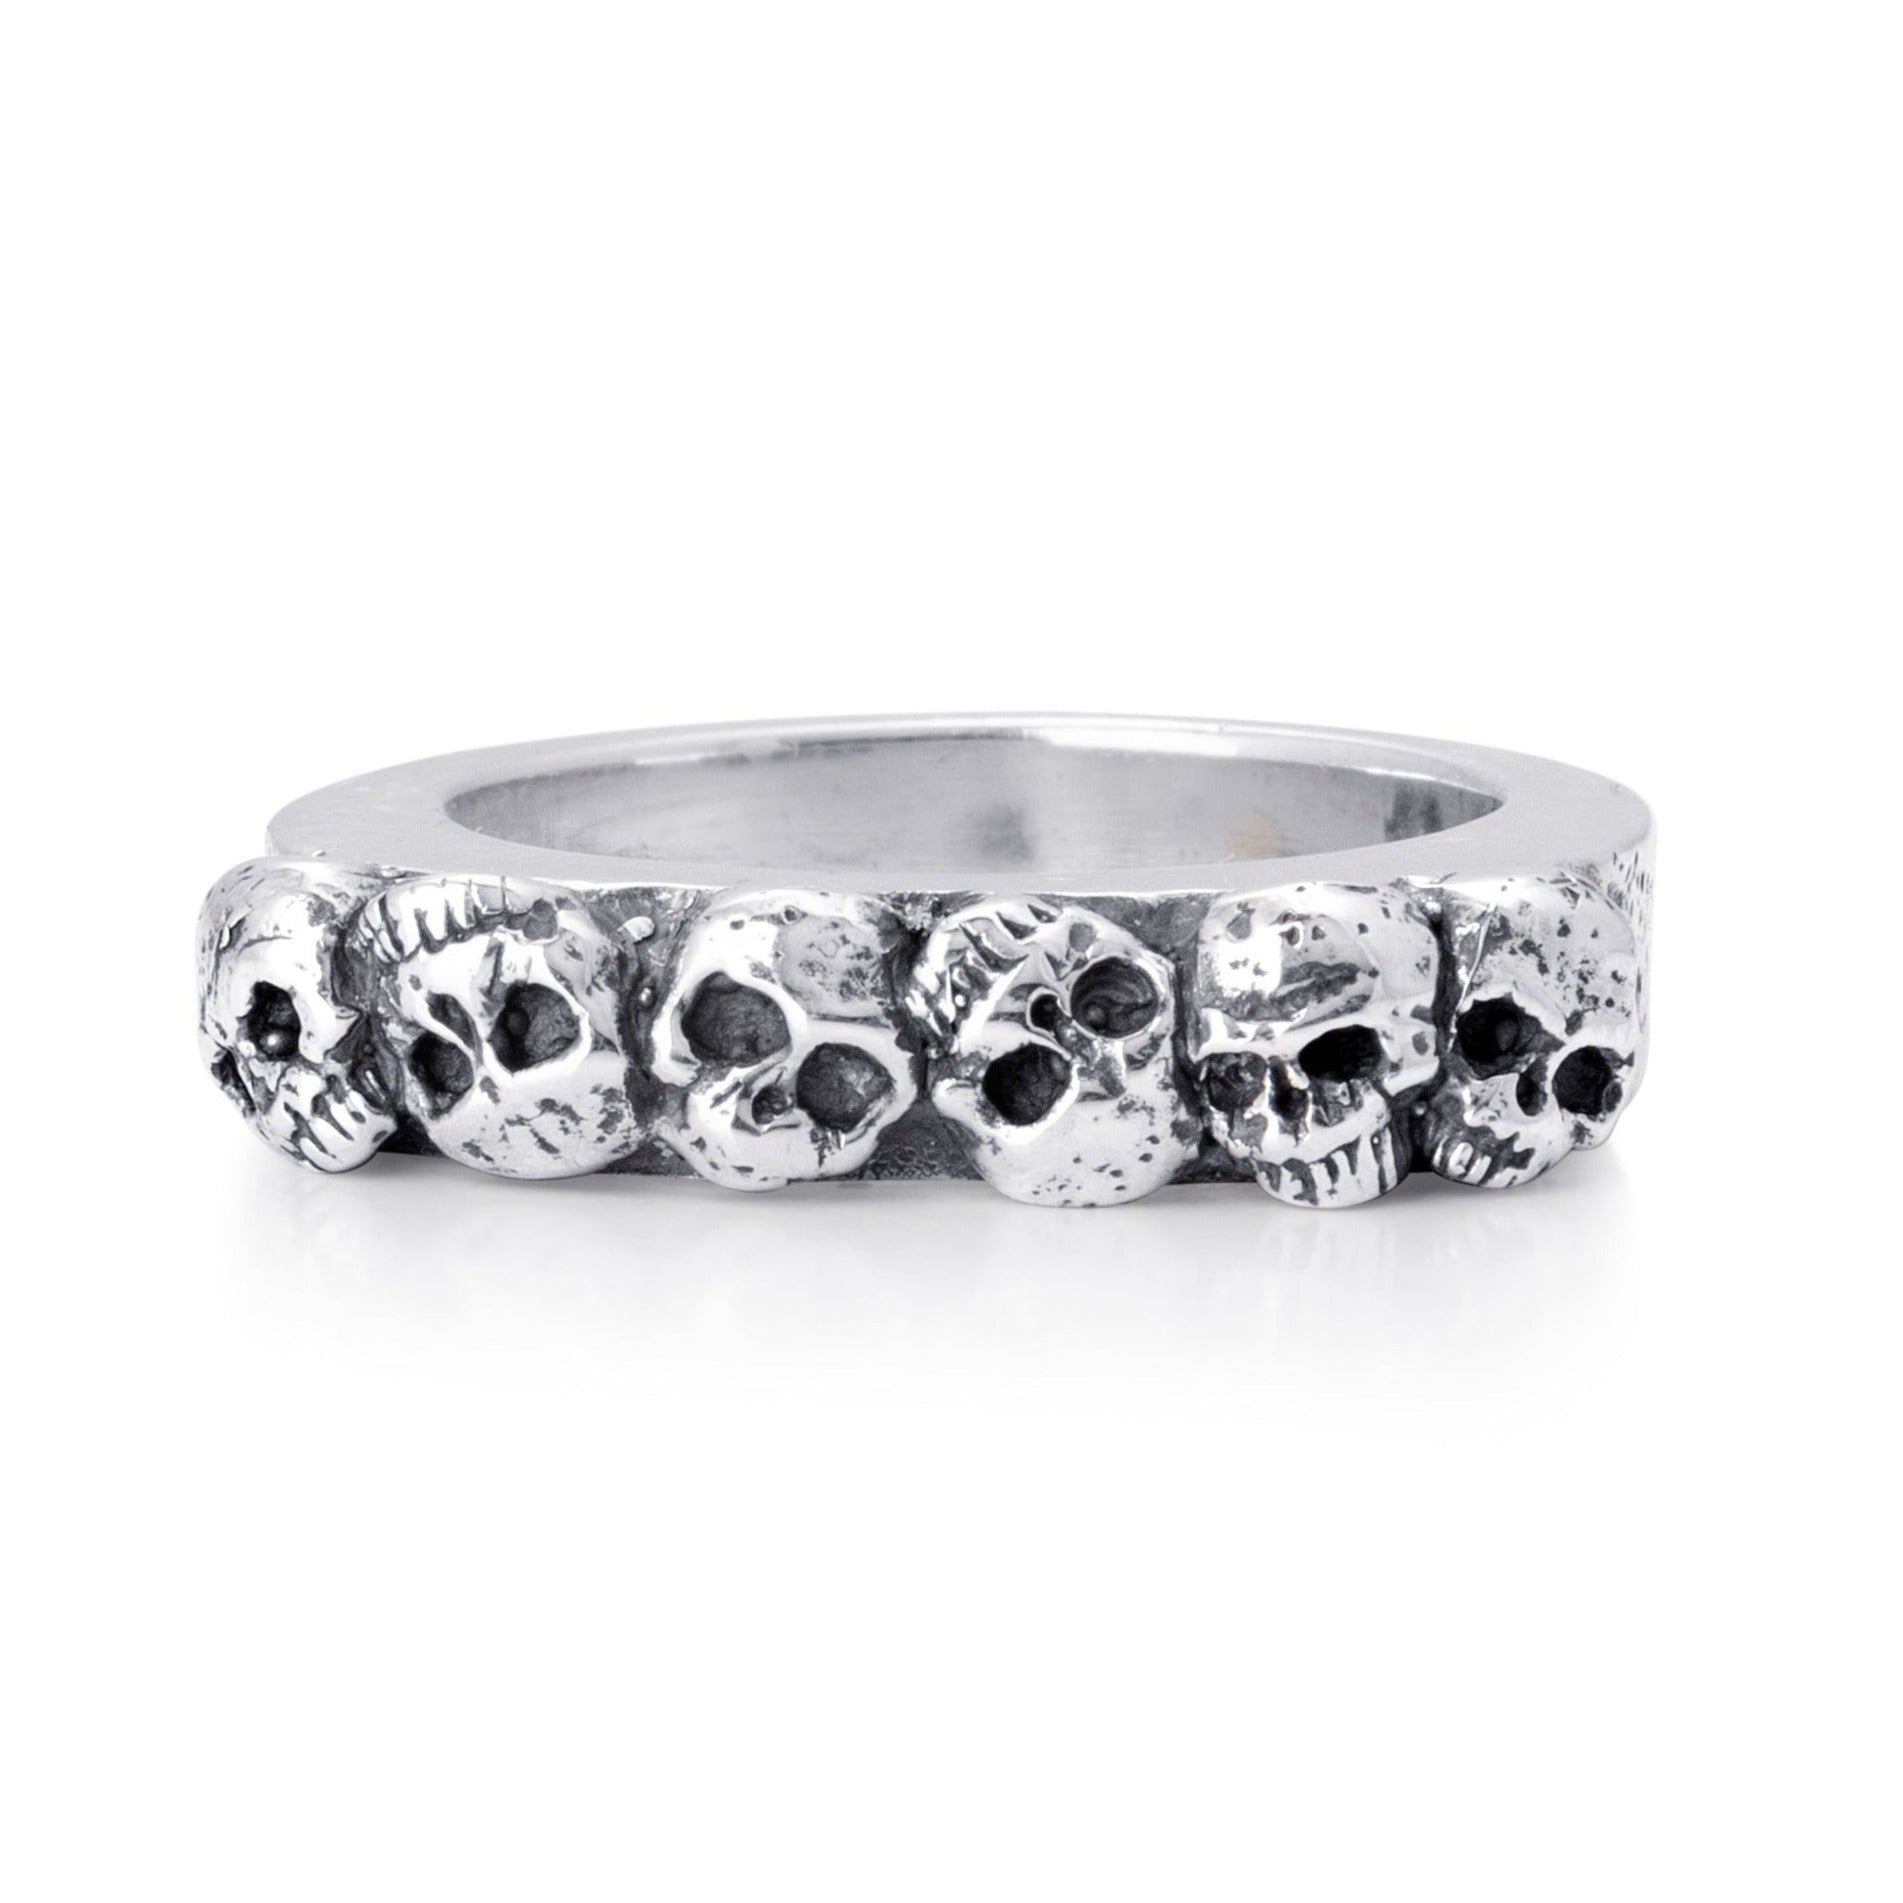 Solid sterling silver band with six skulls exposed on the top. Pitting surrounds the skulls on the top. Front view of the ring